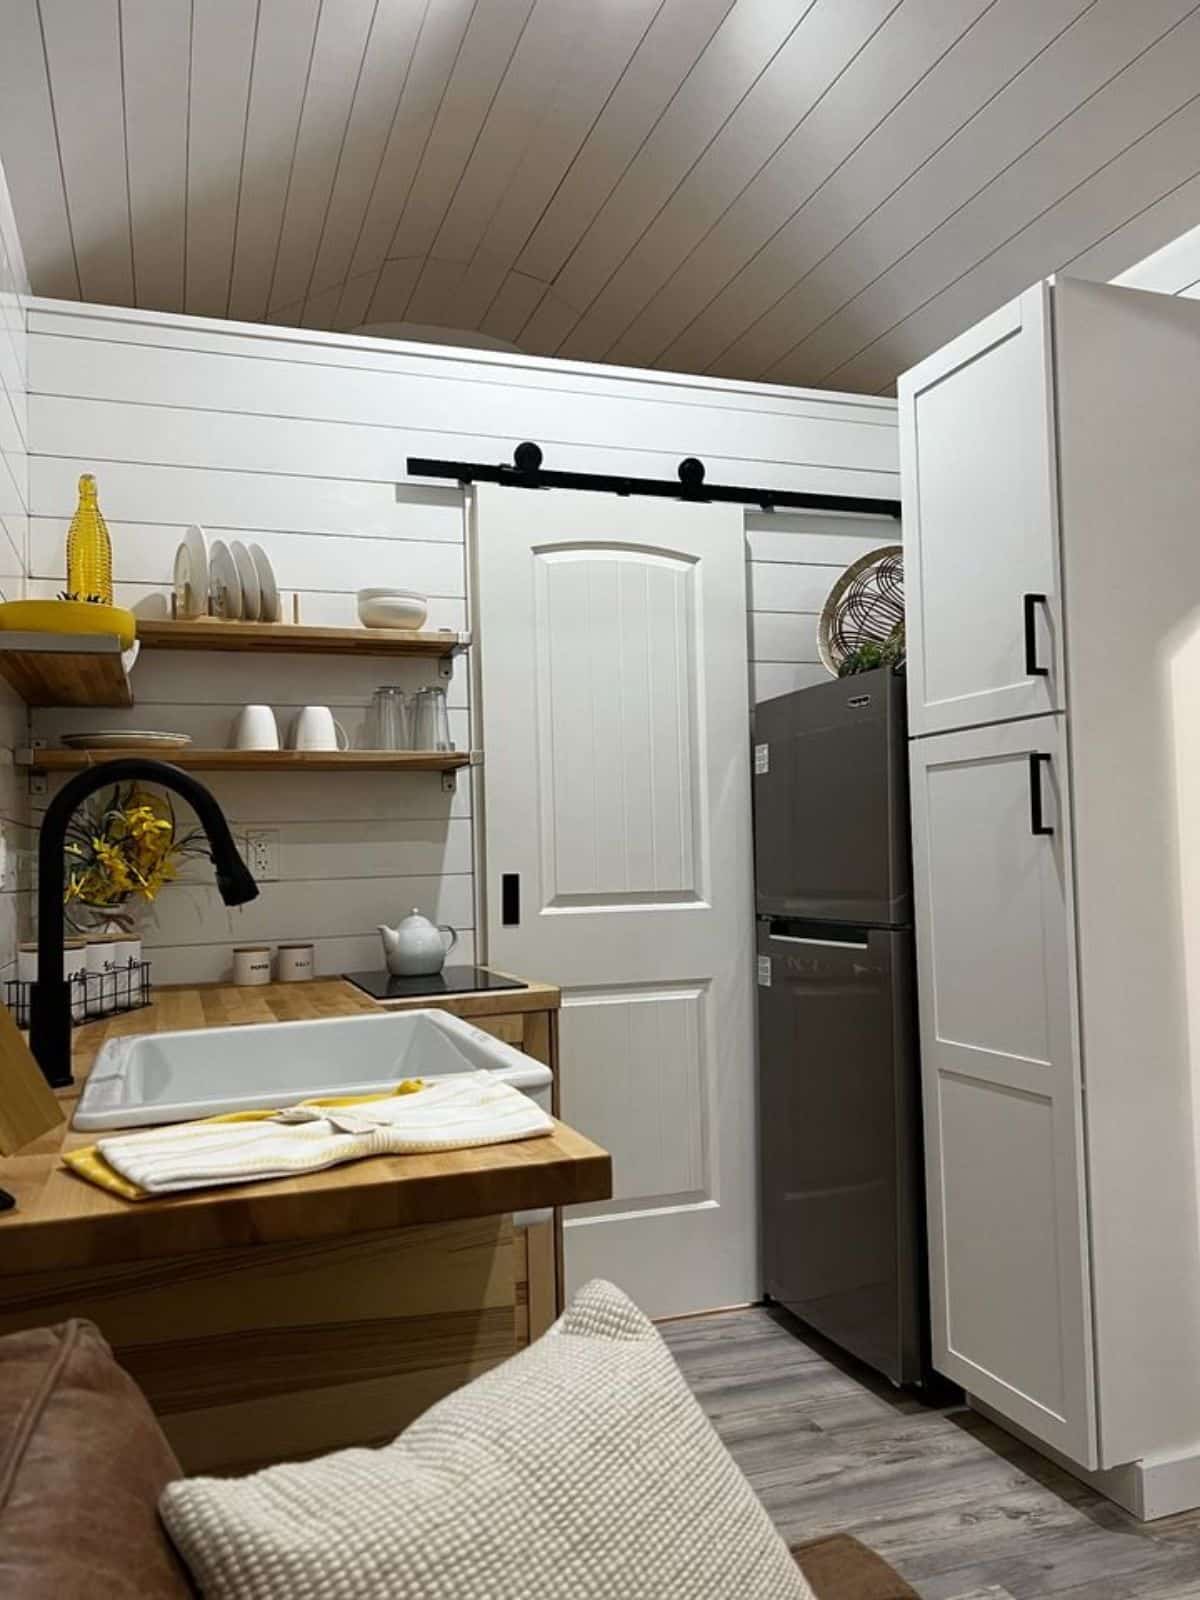 double door refrigerator and full length pantry in the kitchen area